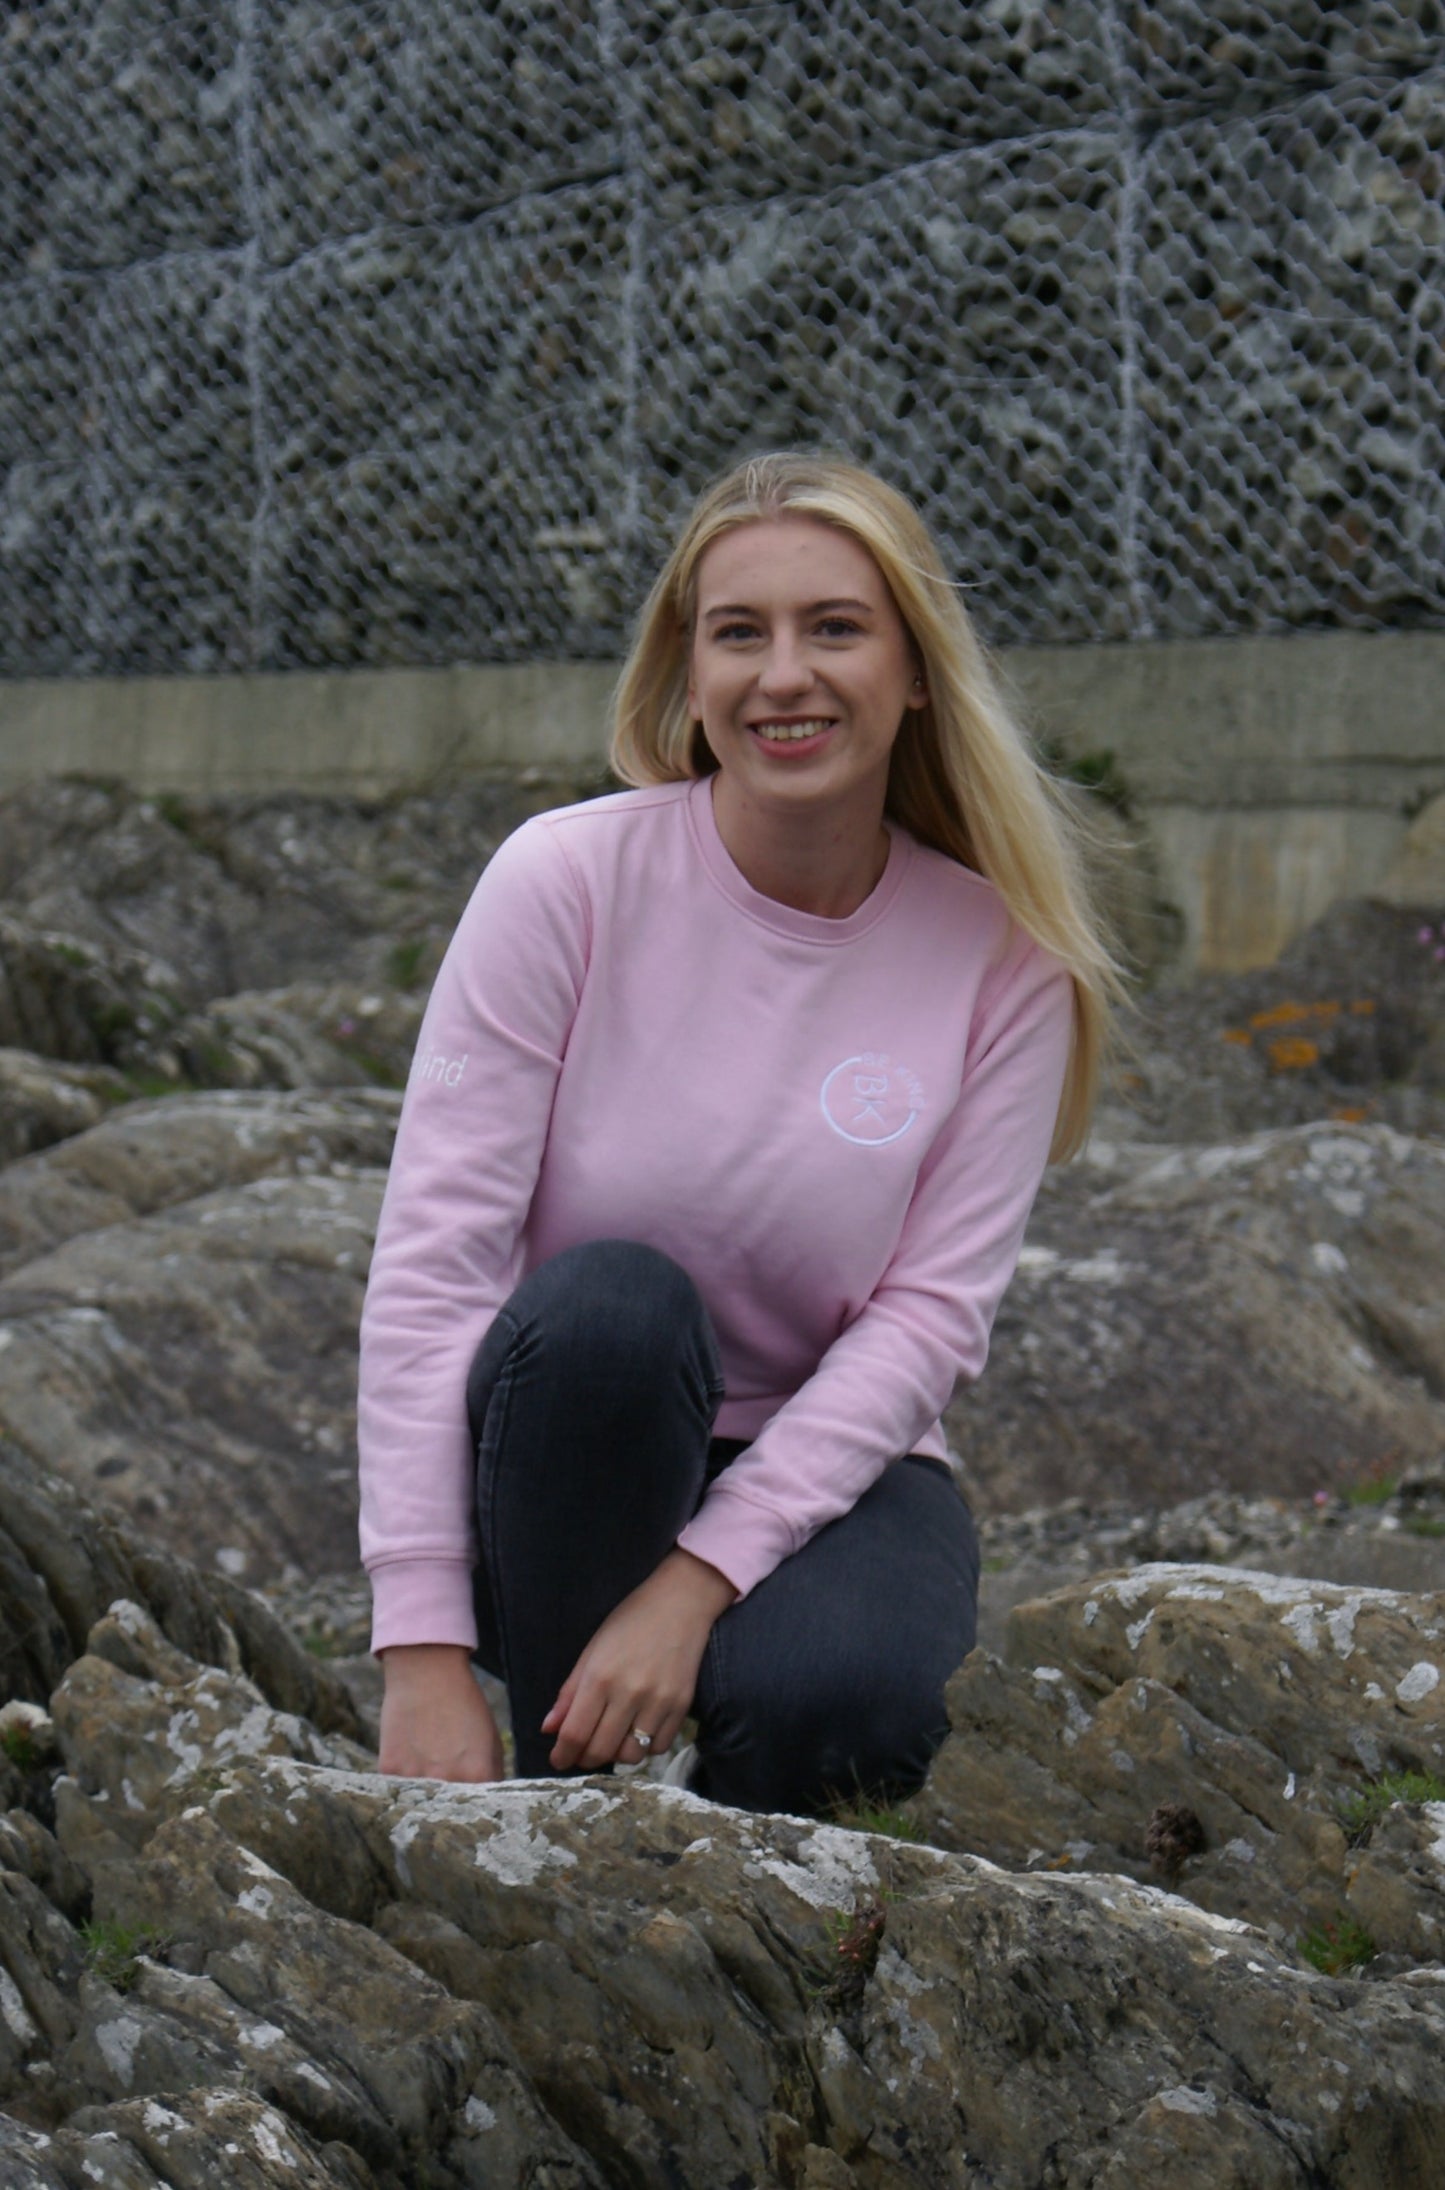 A woman kneels on some rocks, she's wearing a Bubblegum Pink Organic Cotton Sweatshirt from the Be Kind Apparel Original Collection